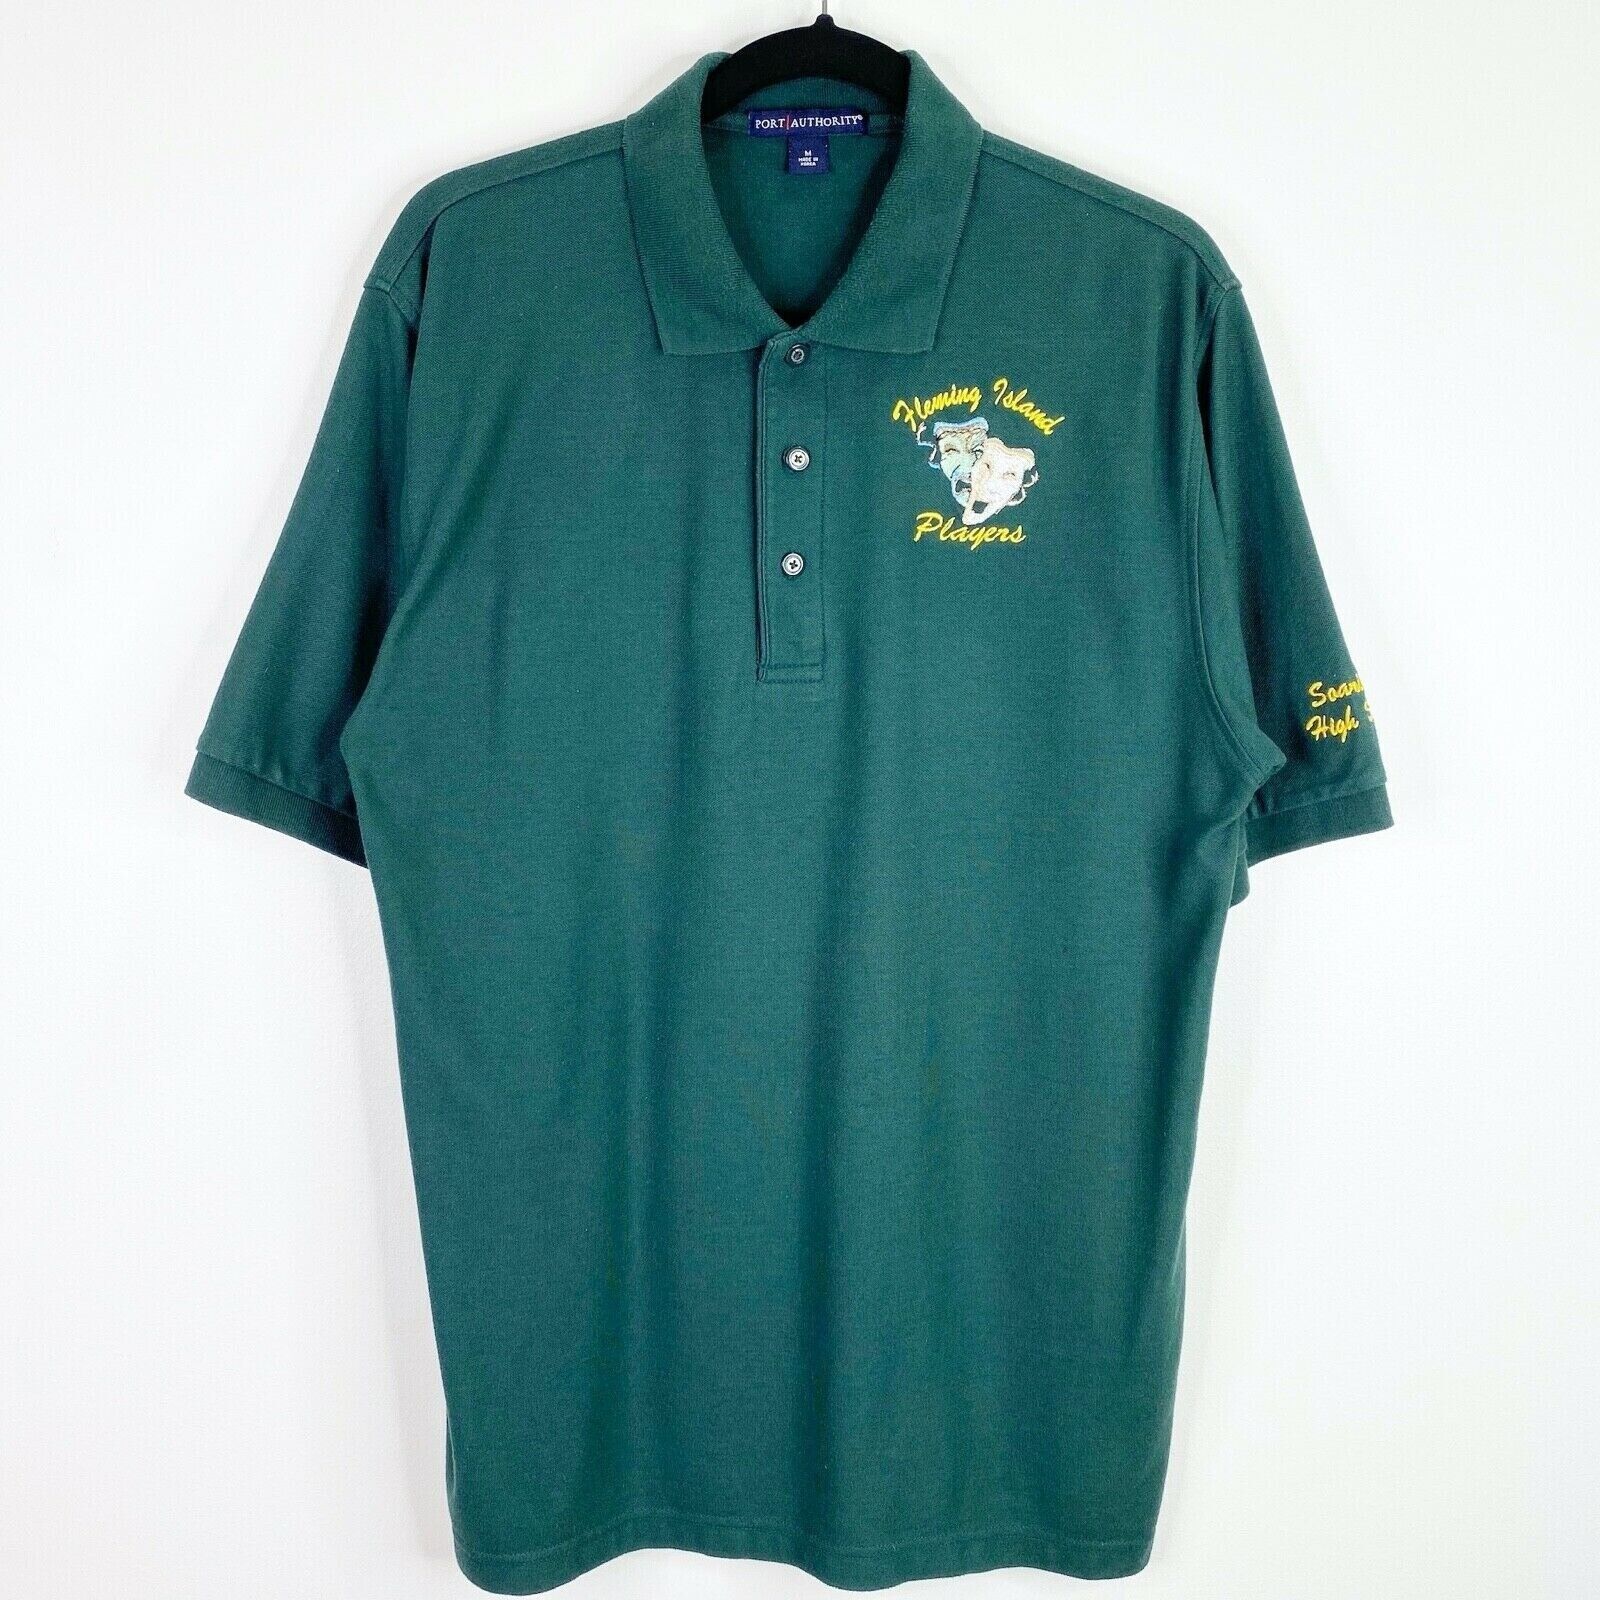 Primary image for Fleming Island Players Polo Shirt Top Size Medium M Soaring with High Standards